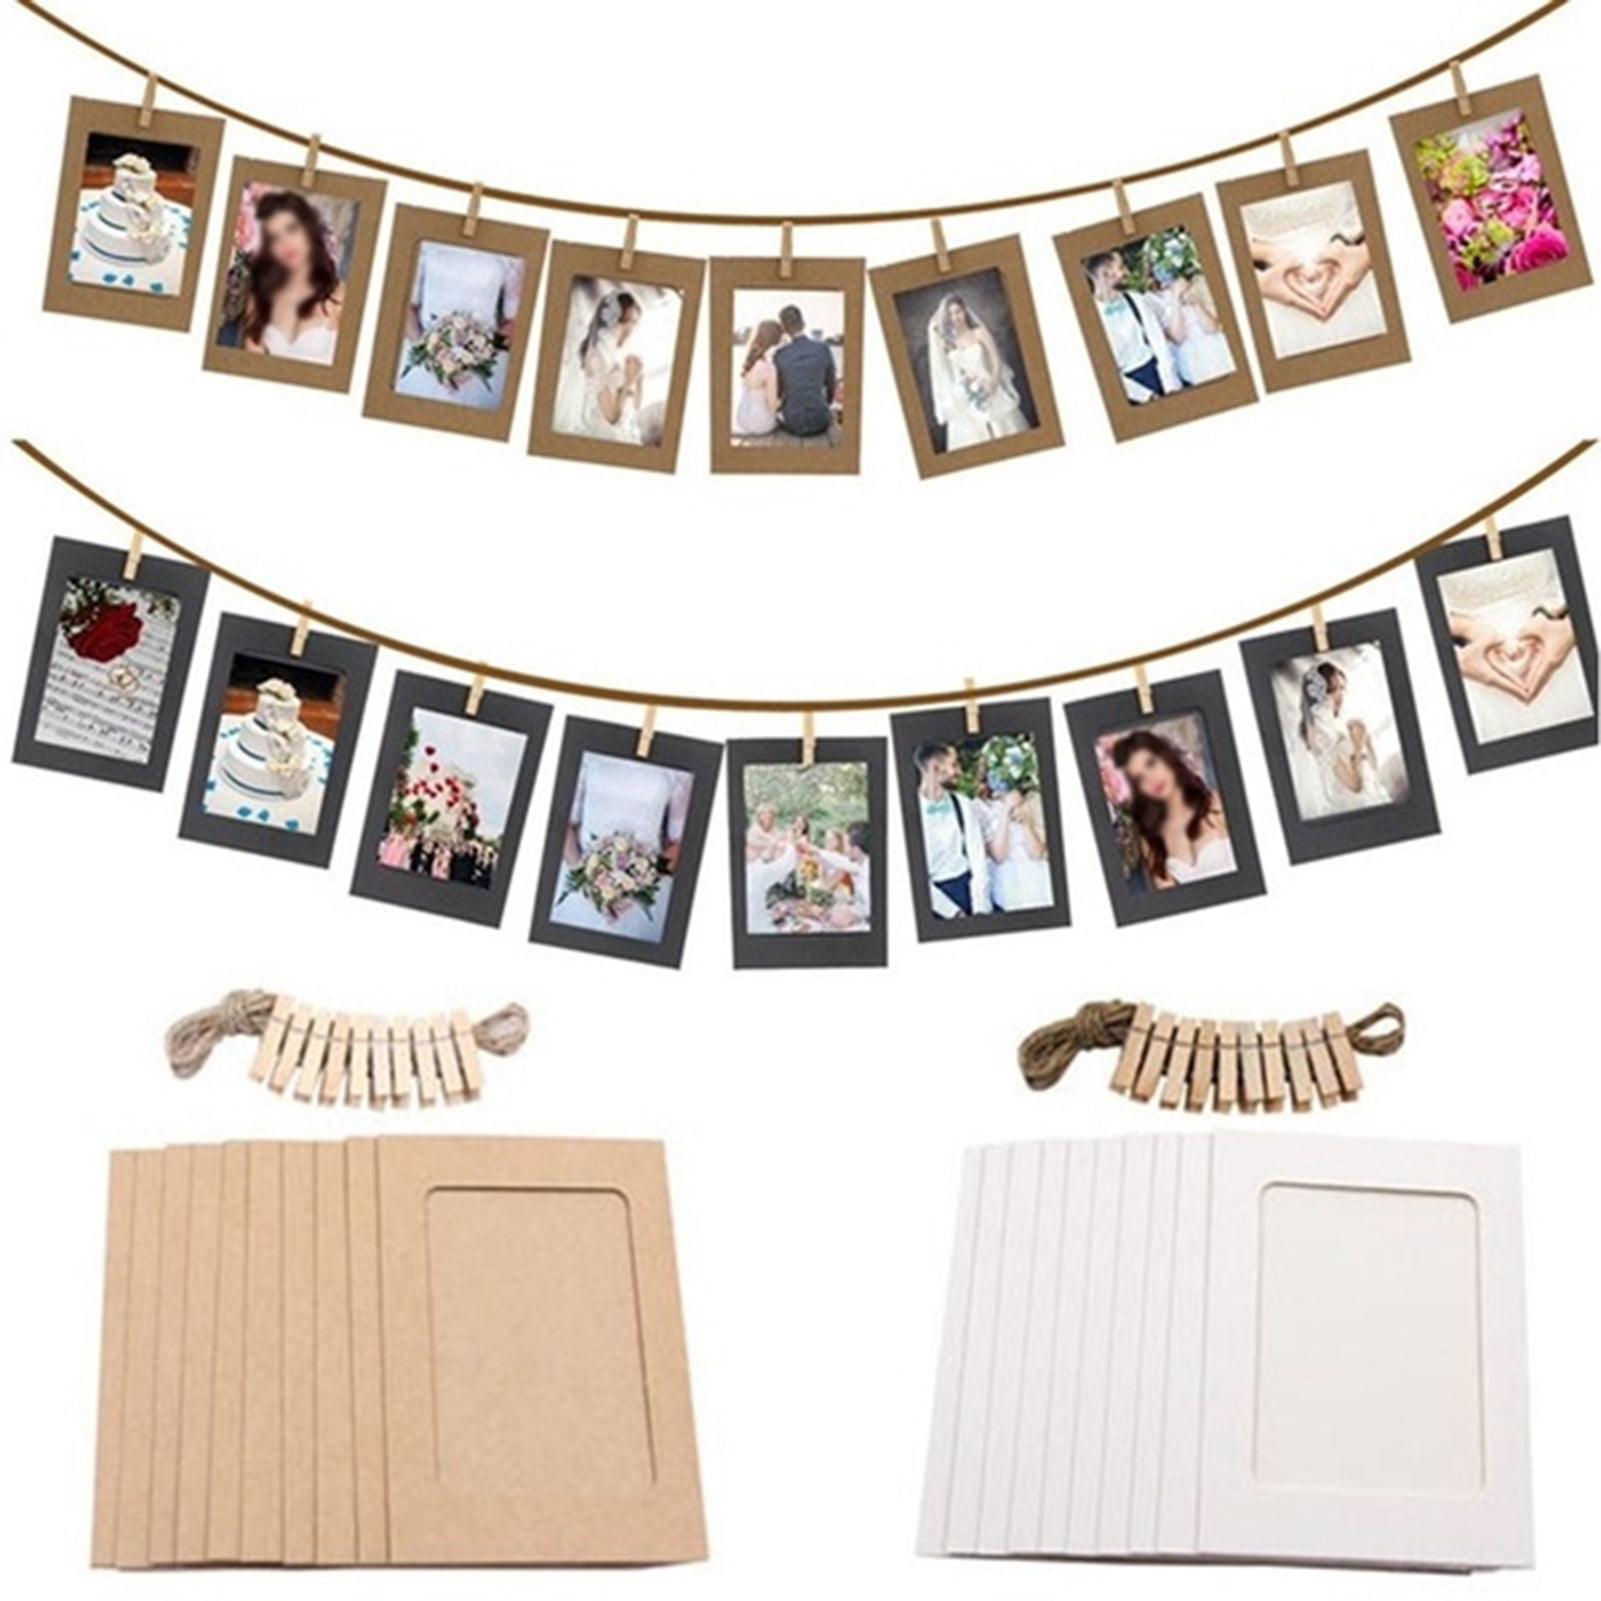  VORCOOL Kraft Paper Photo Frames 4x6in 30pcs Picture Frames  Multi Wall Hanging Paper Photo Frames with 30 Clips 3 Ropes for DIY Display  Party Decor